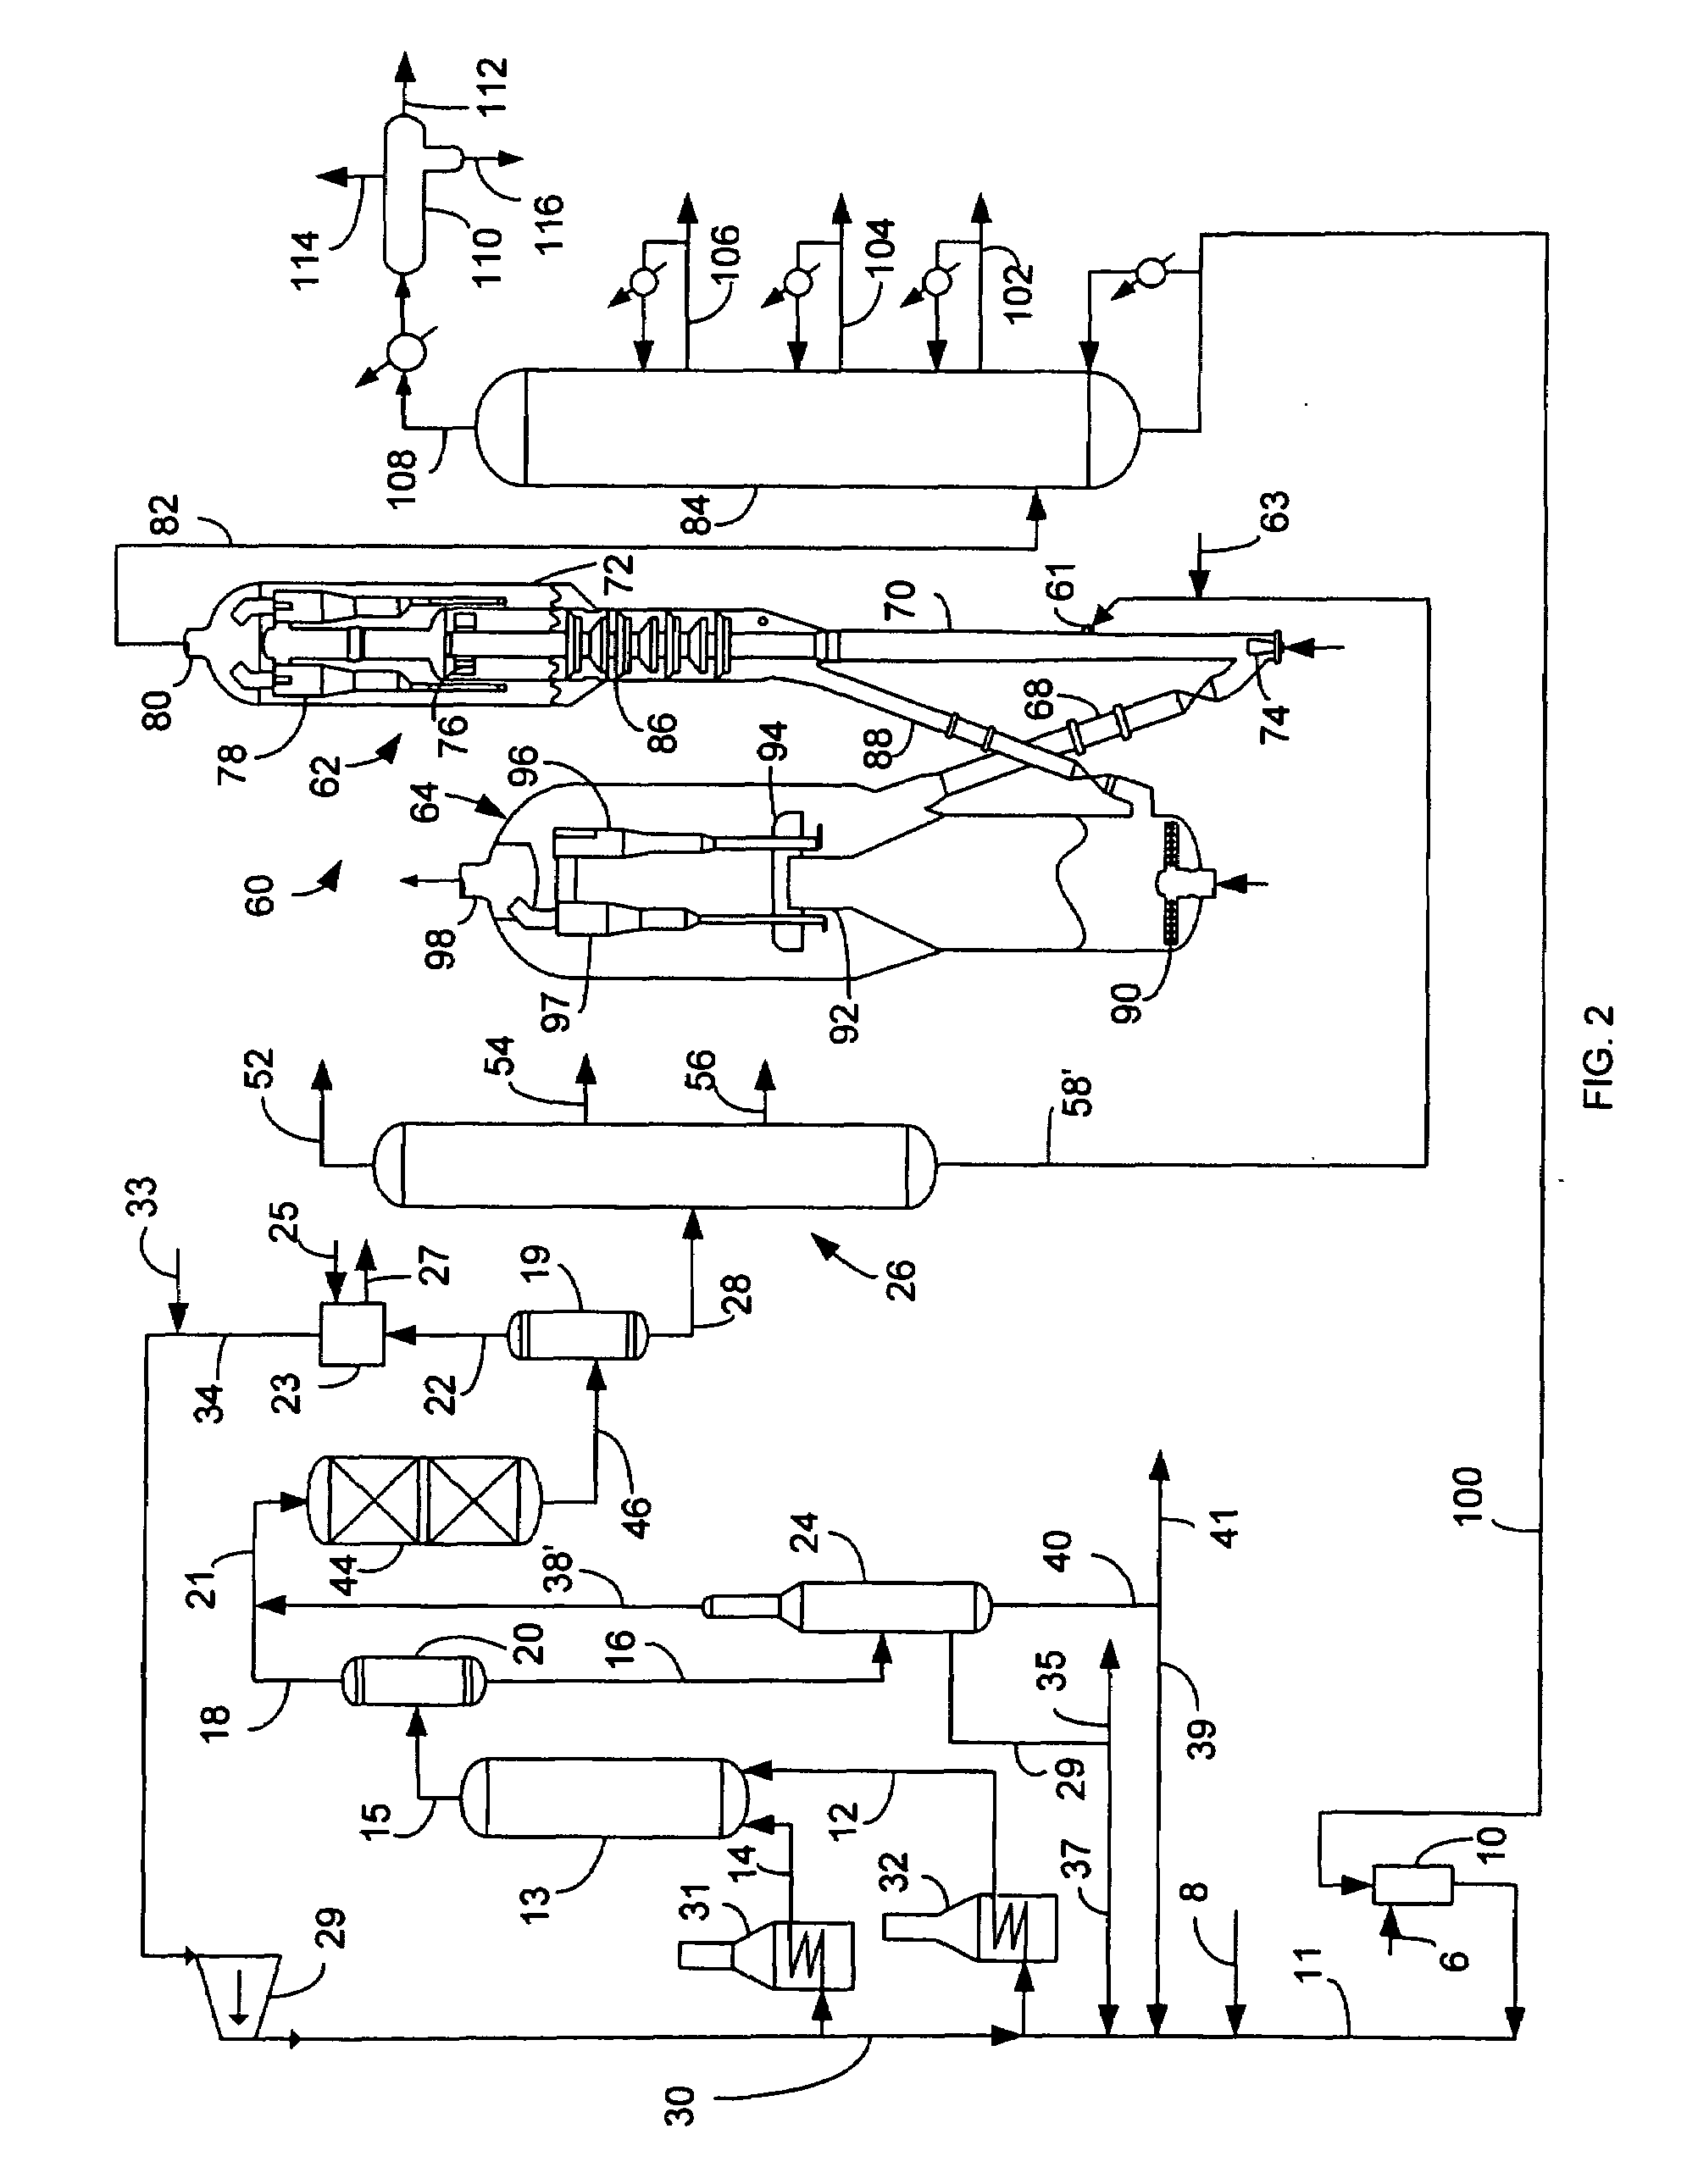 Process and Apparatus for Integrated Heavy Oil Upgrading